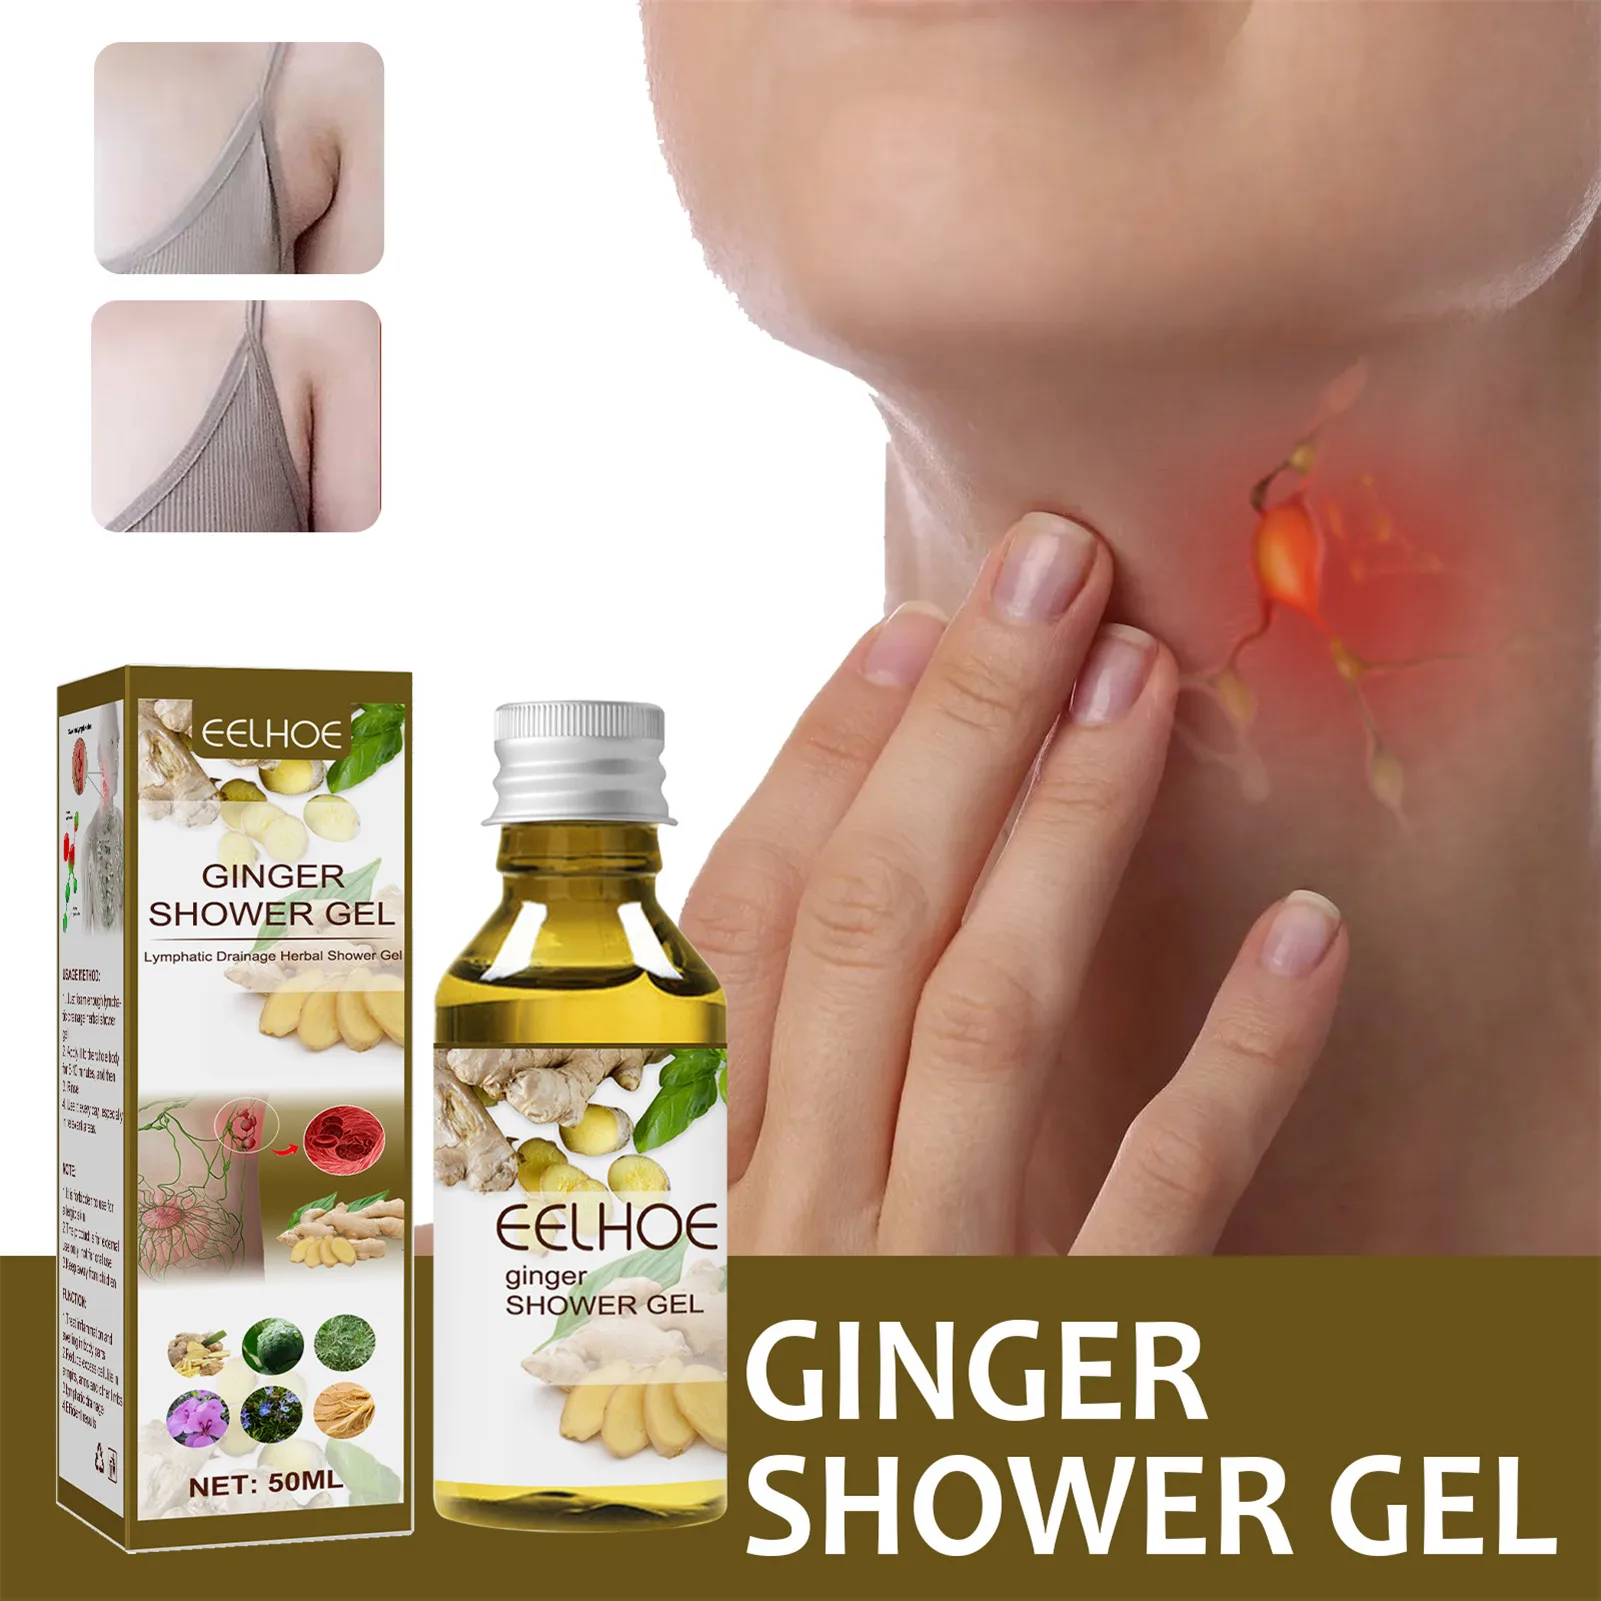 

Lymphatic Drainage Herbal Shower Gel Moisturizing Body Wash Natural Ginger Shower Oil For Neck Armpit Anti Swelling Removes